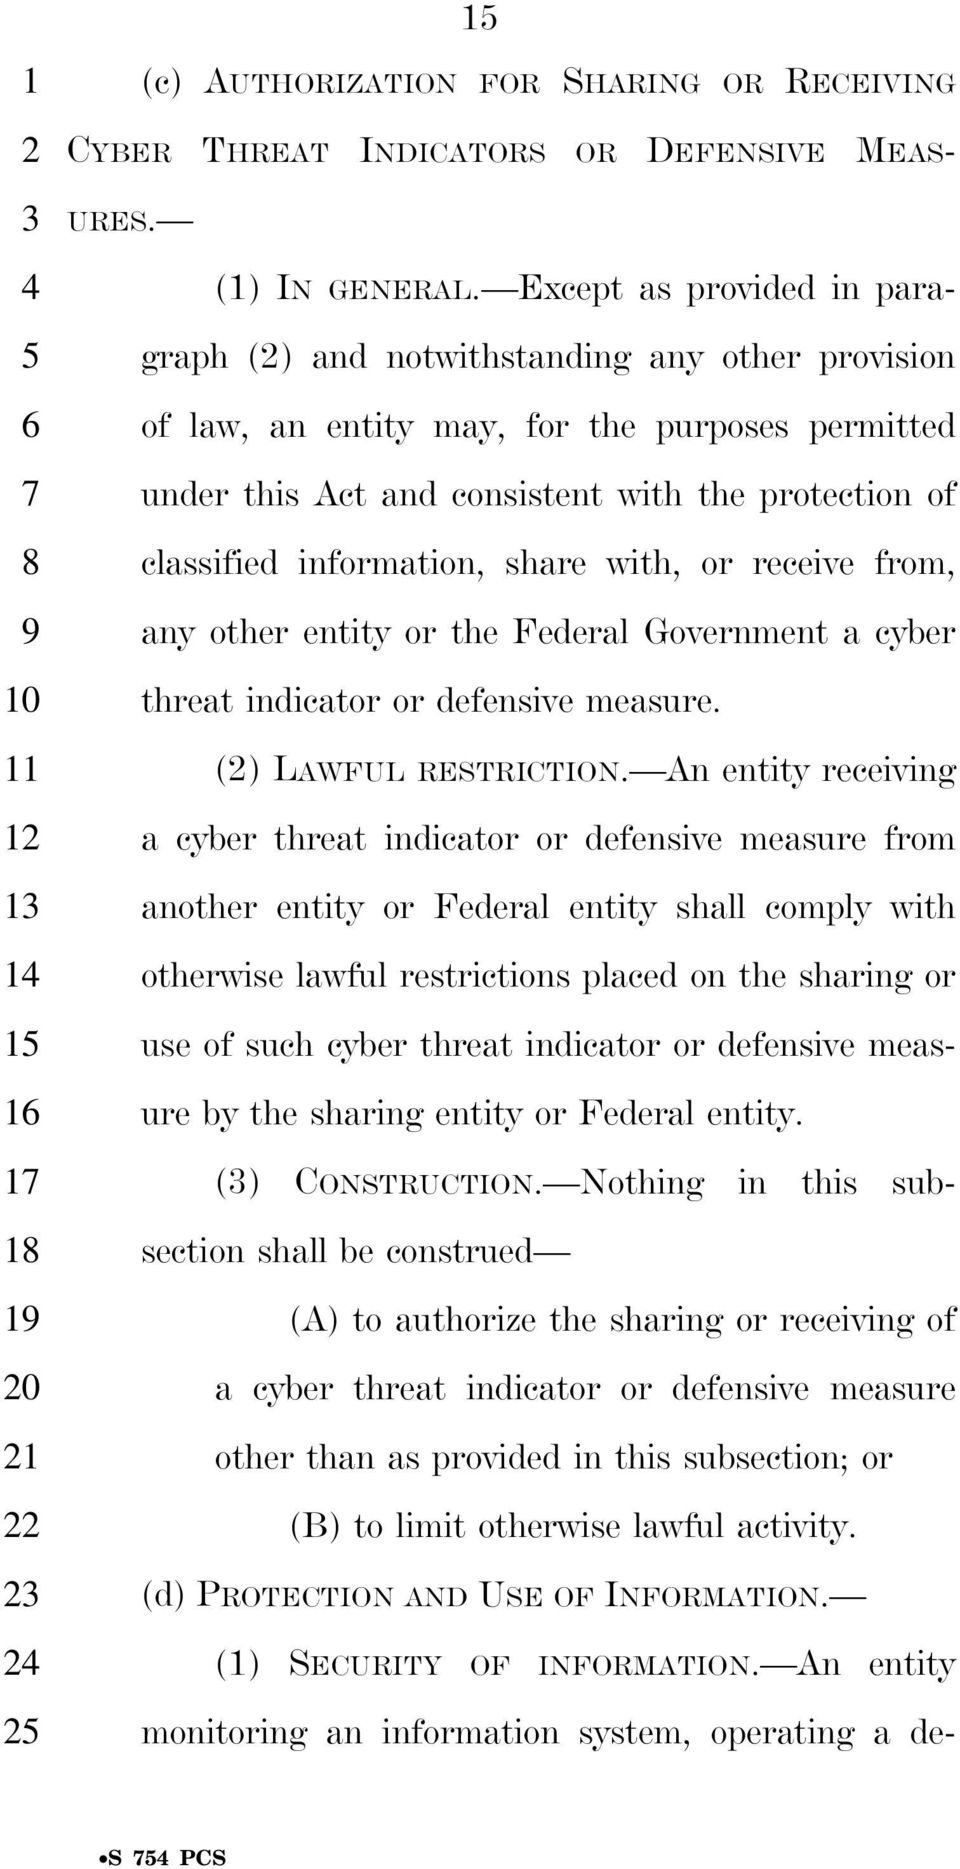 information, share with, or receive from, any other entity or the Federal Government a cyber threat indicator or defensive measure. (2) LAWFUL RESTRICTION.